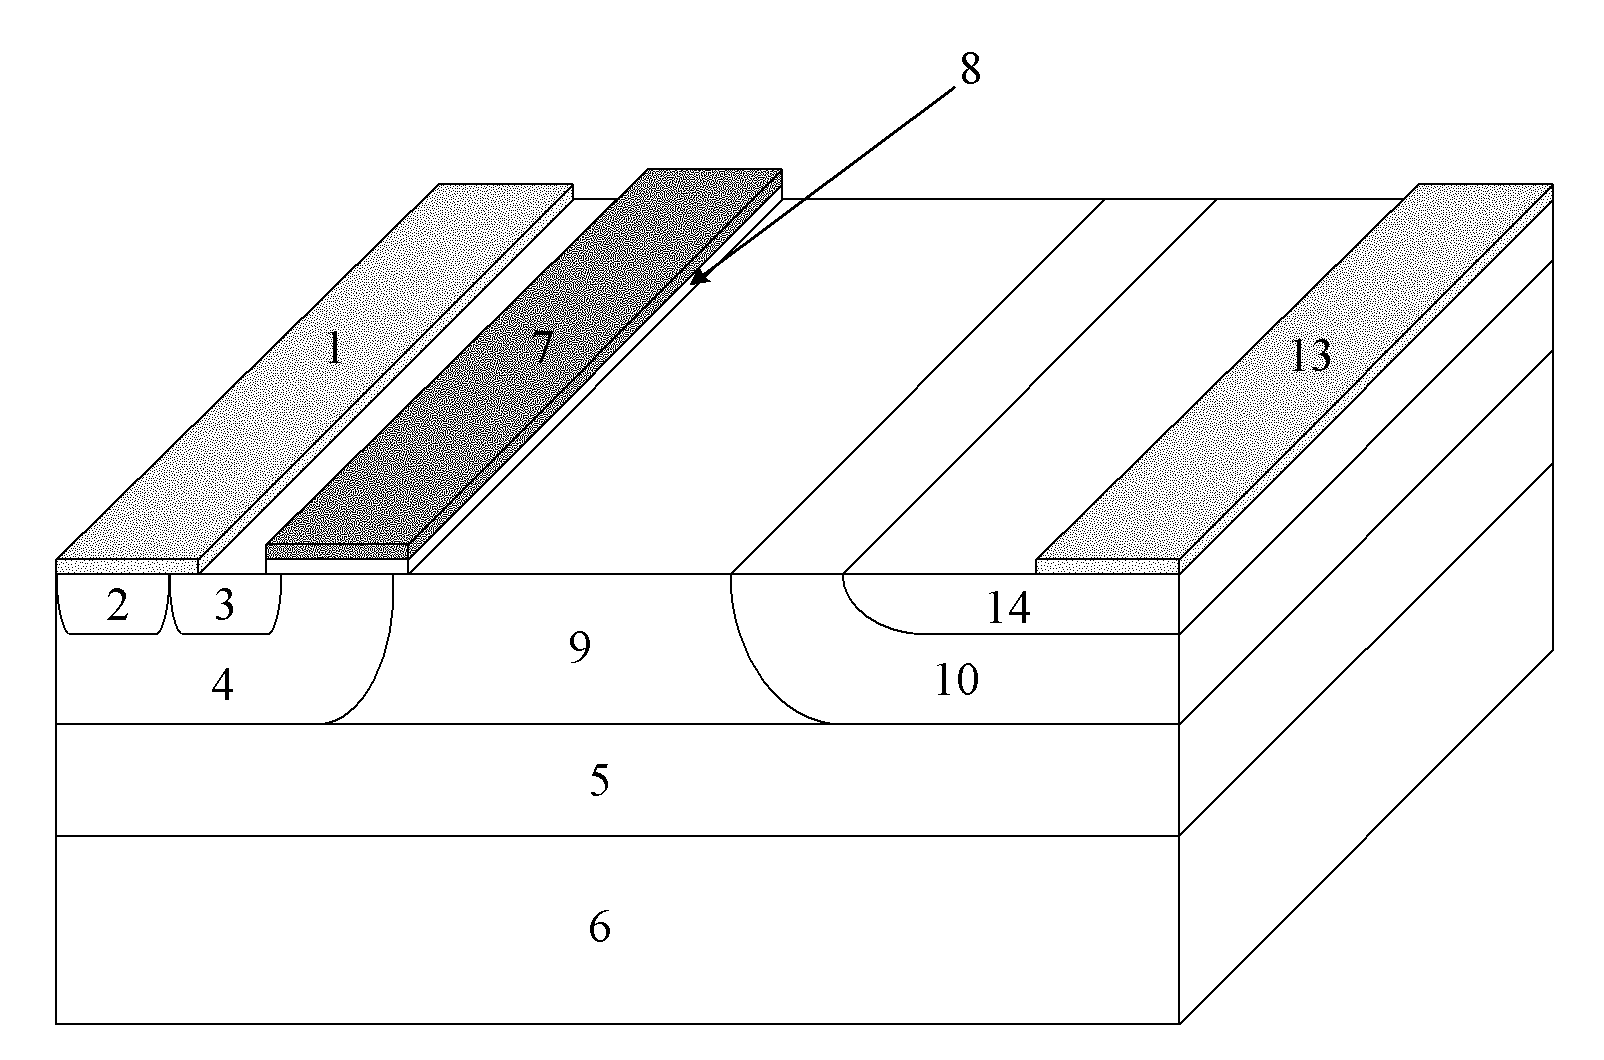 SOI-LIGBT (silicon on insulator-lateral insulated gate bipolar transistor) device with split anode structure